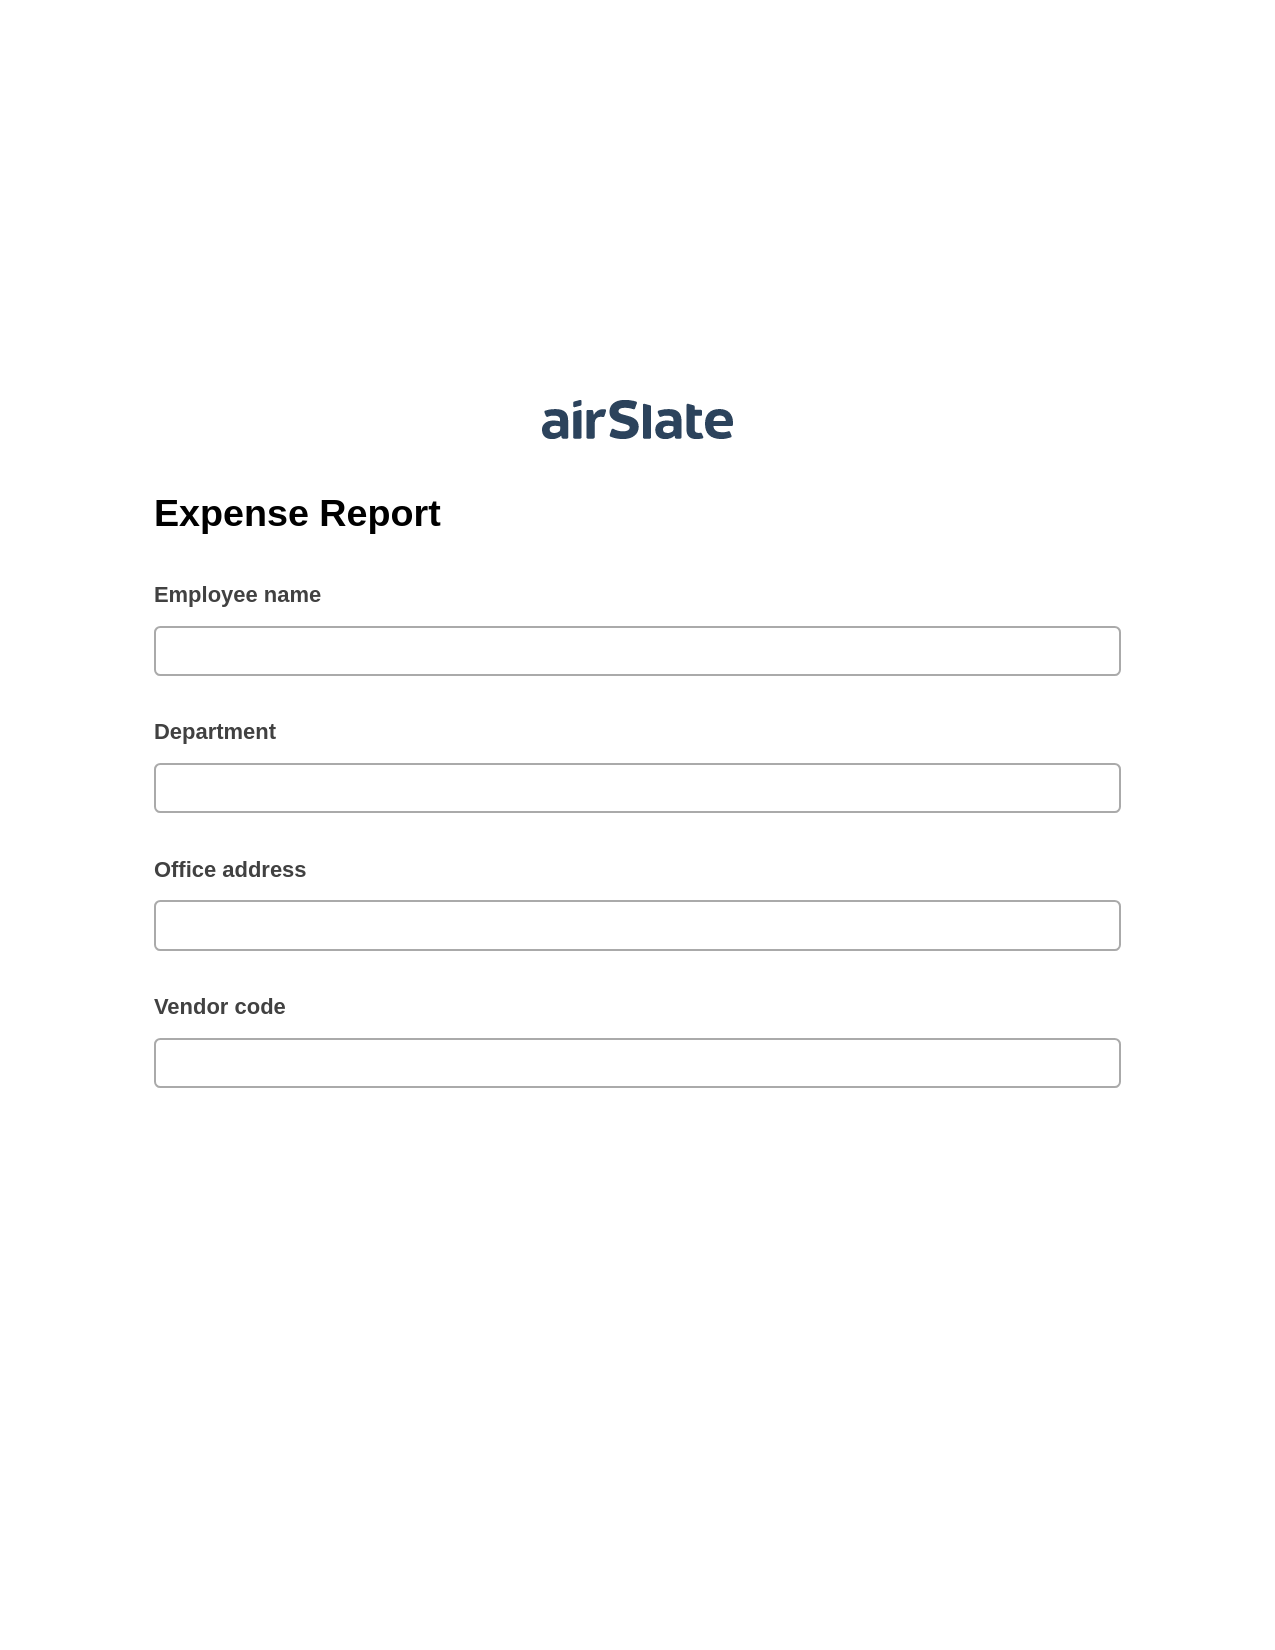 Expense Report Pre-fill Dropdown from Airtable, Update Salesforce Record Bot, Archive to SharePoint Folder Bot